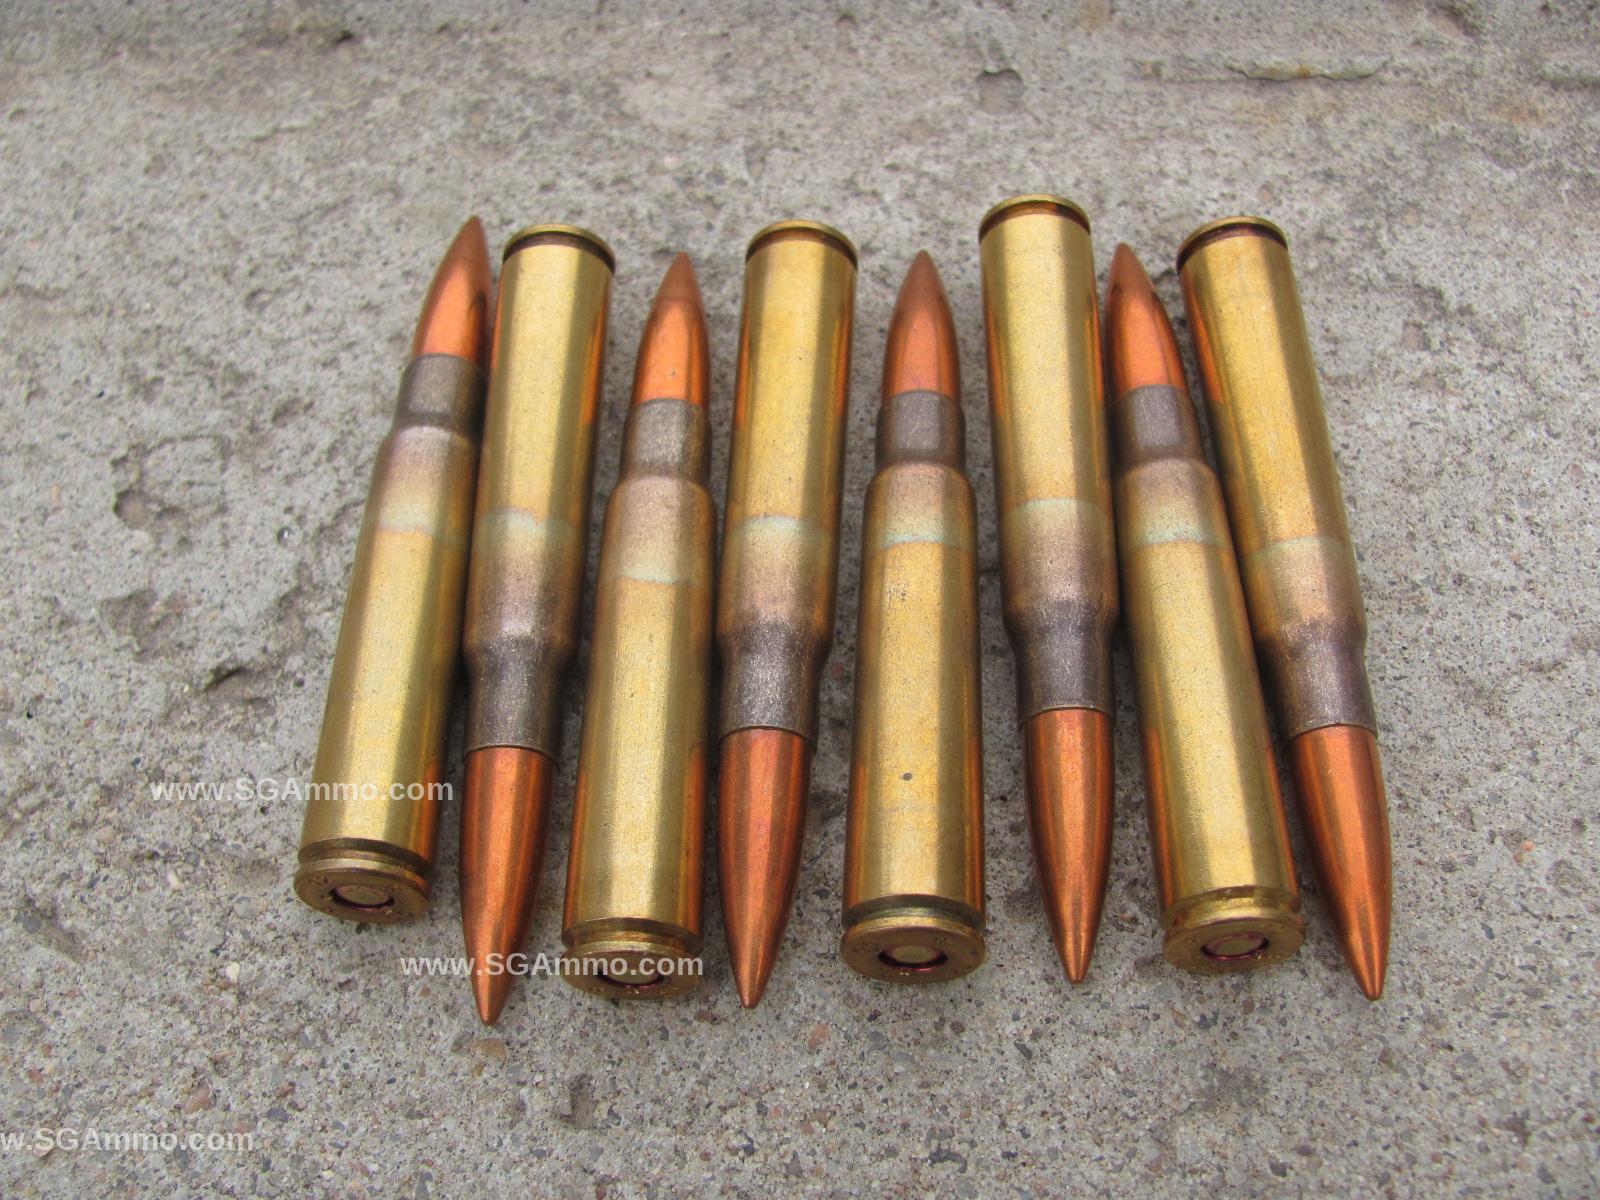 540 Round Can - 8mm Mauser 196 Grain FMJ Yugo 1950s M49 Spec Brass Case Corrosive Primed Surplus Ammo - Packed in Metal Canister